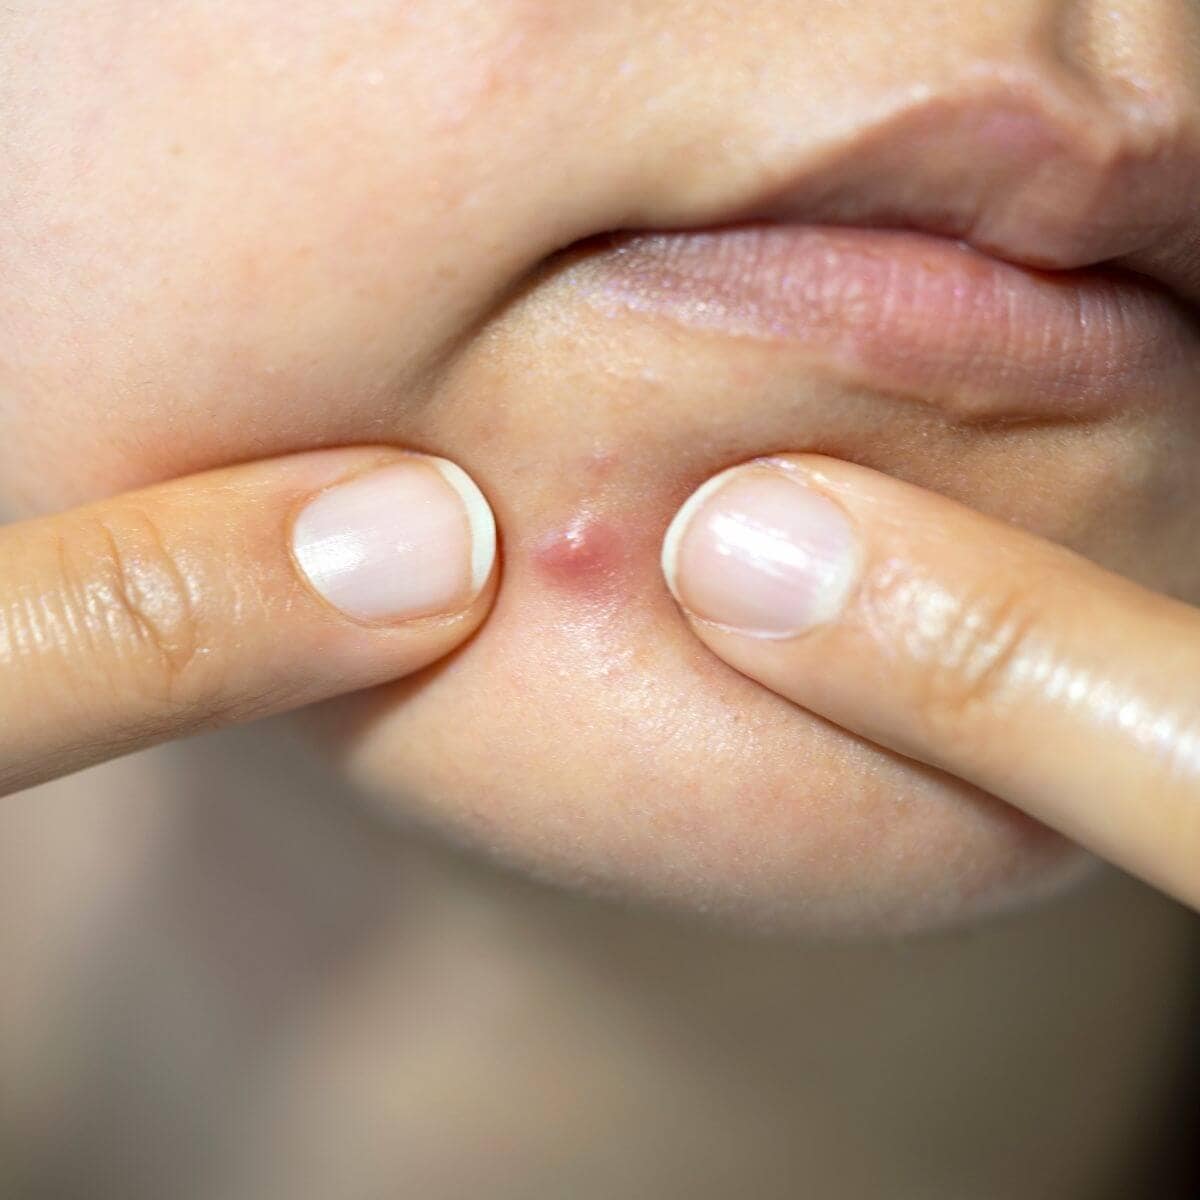 Woman with pimple between two fingers like she's going to squeeze it.